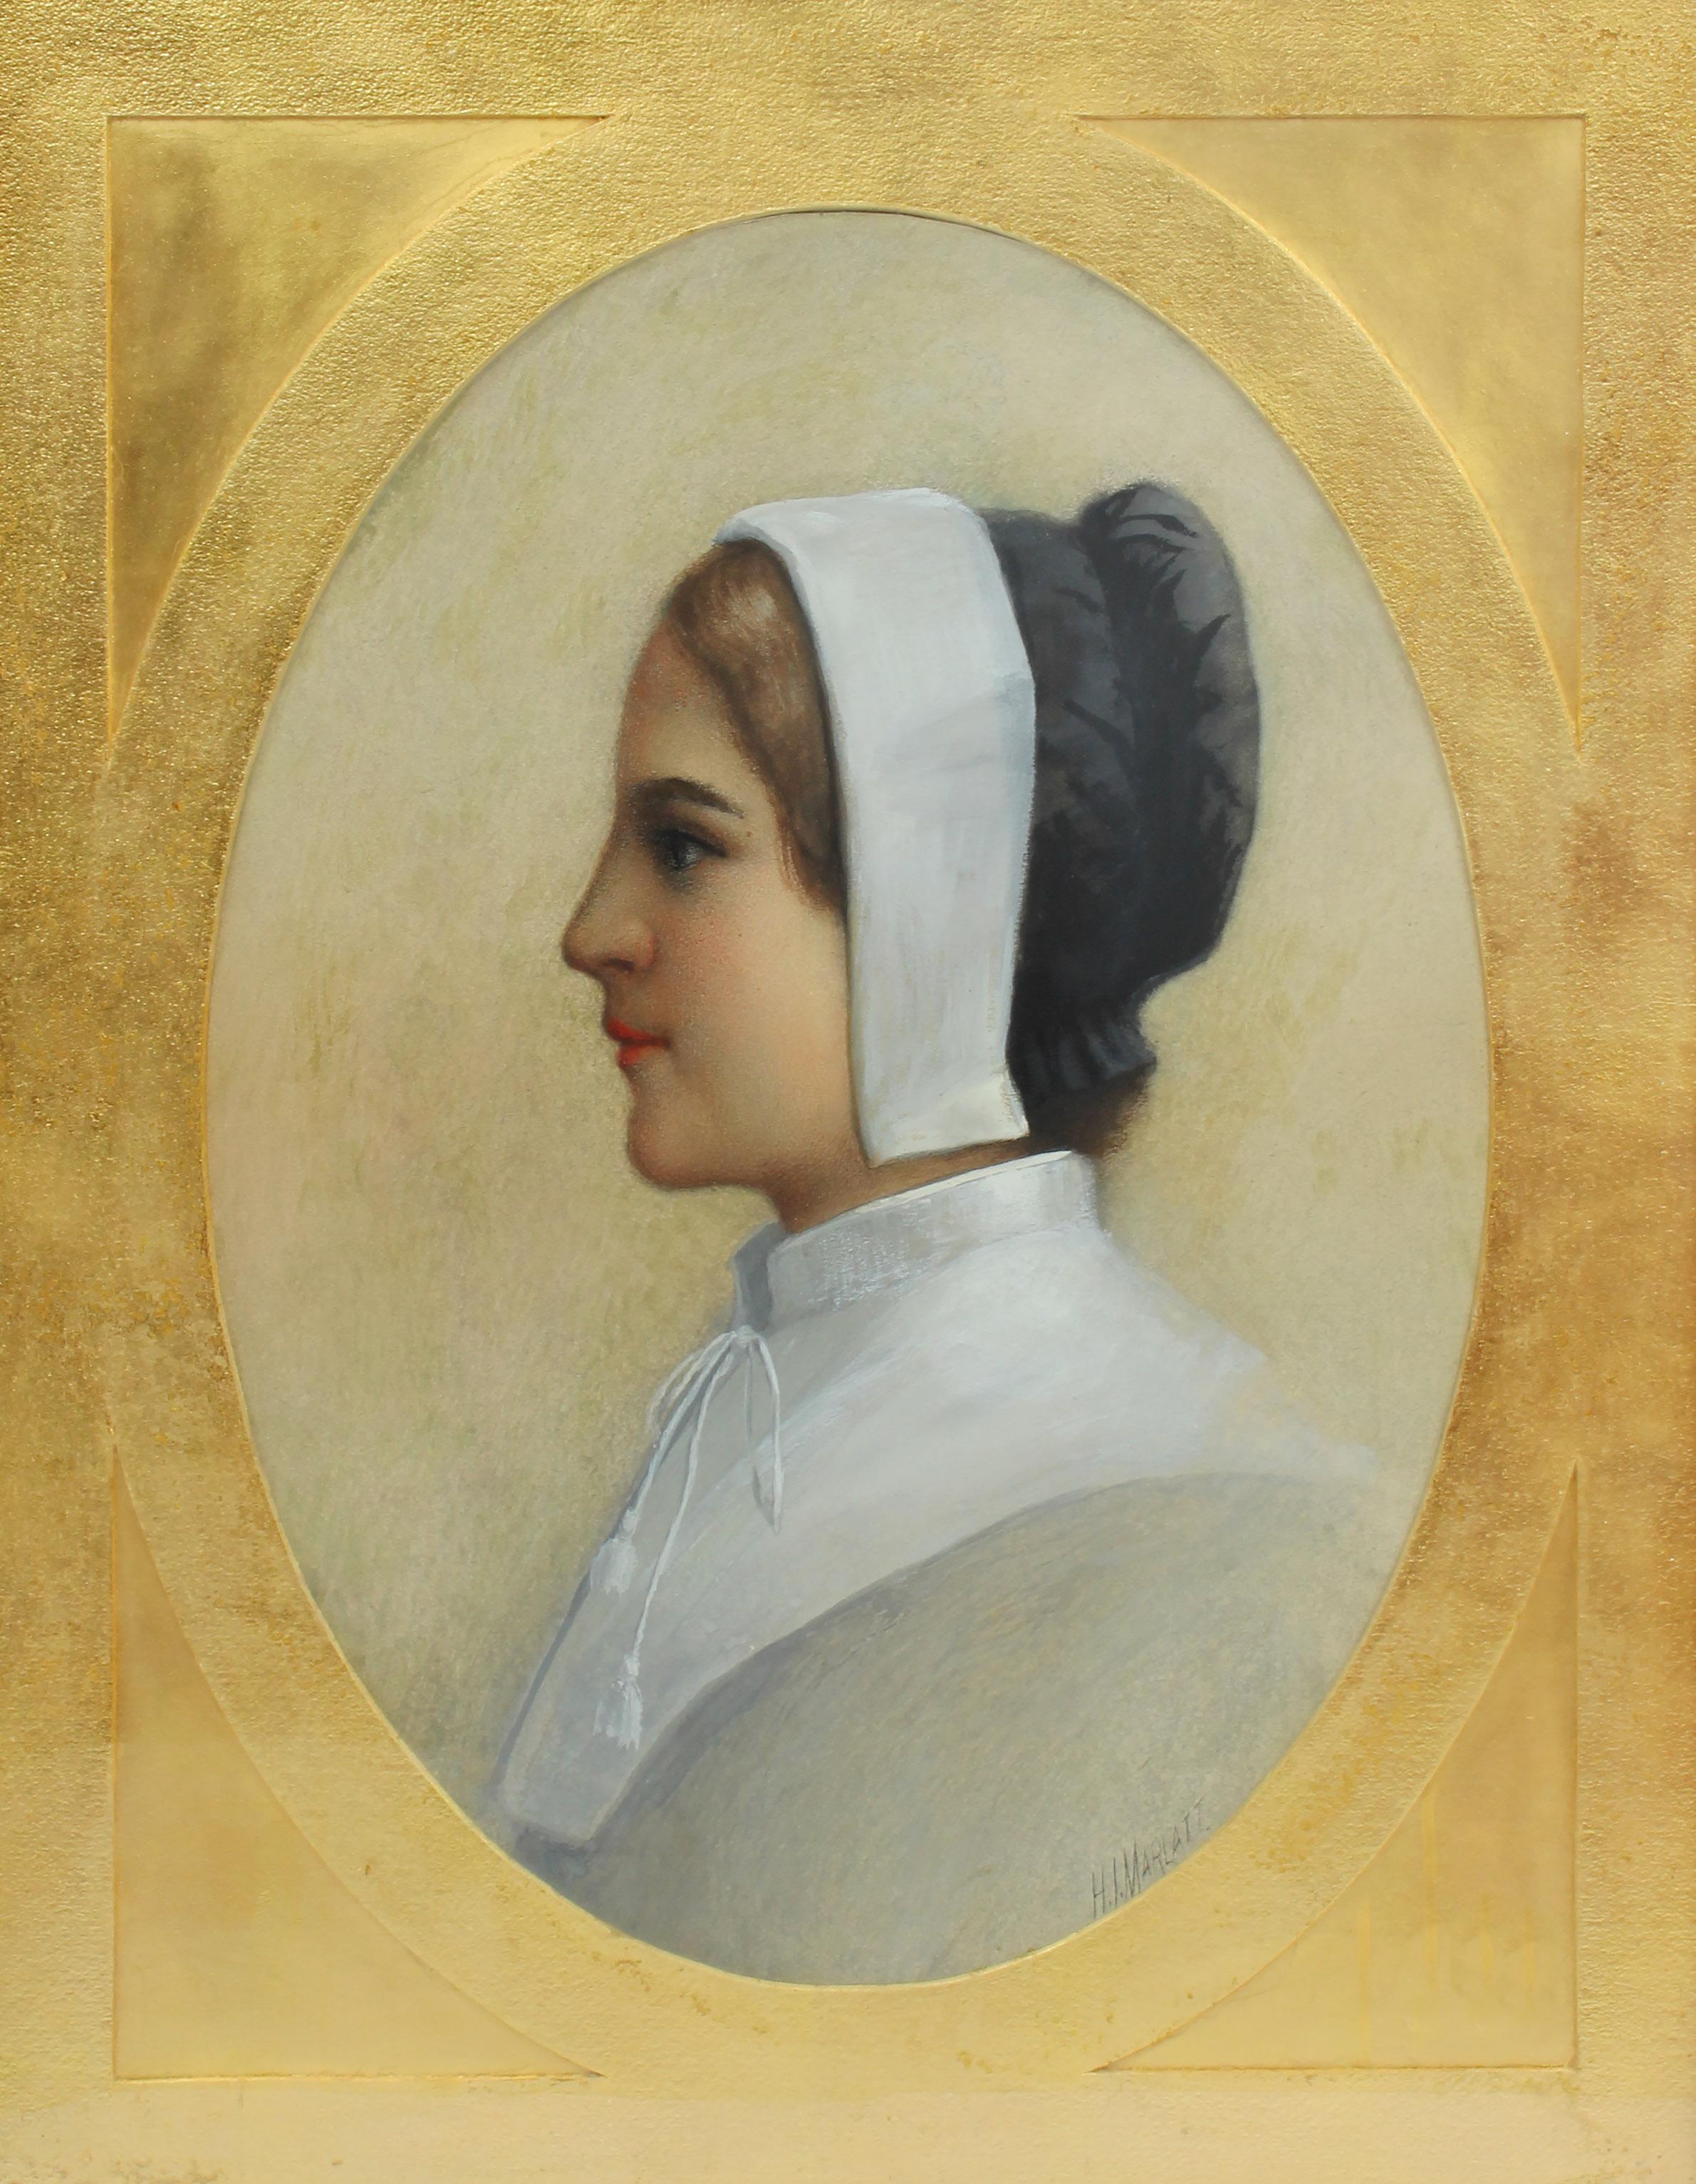 portrait of a young girl named